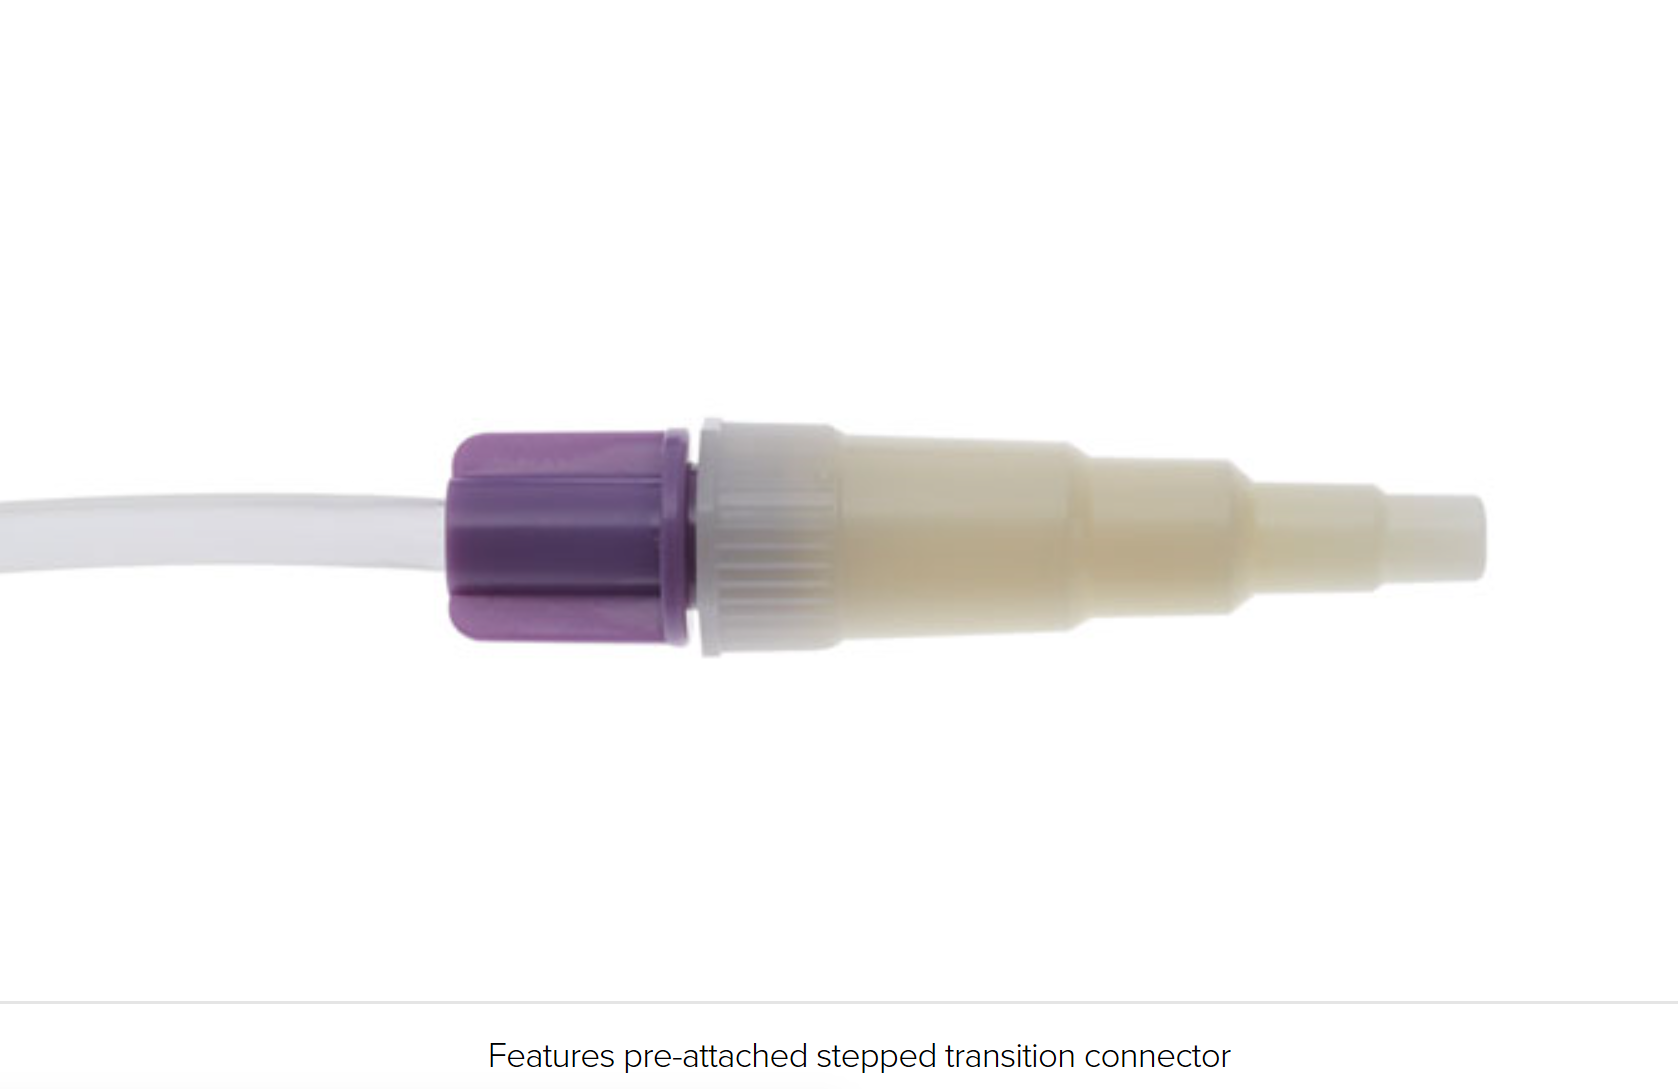 Amsure Enteral Feeding Set with ENFit Connectors, 1200ml Bag Gravity Set with ENFit Connector & Transition Connector